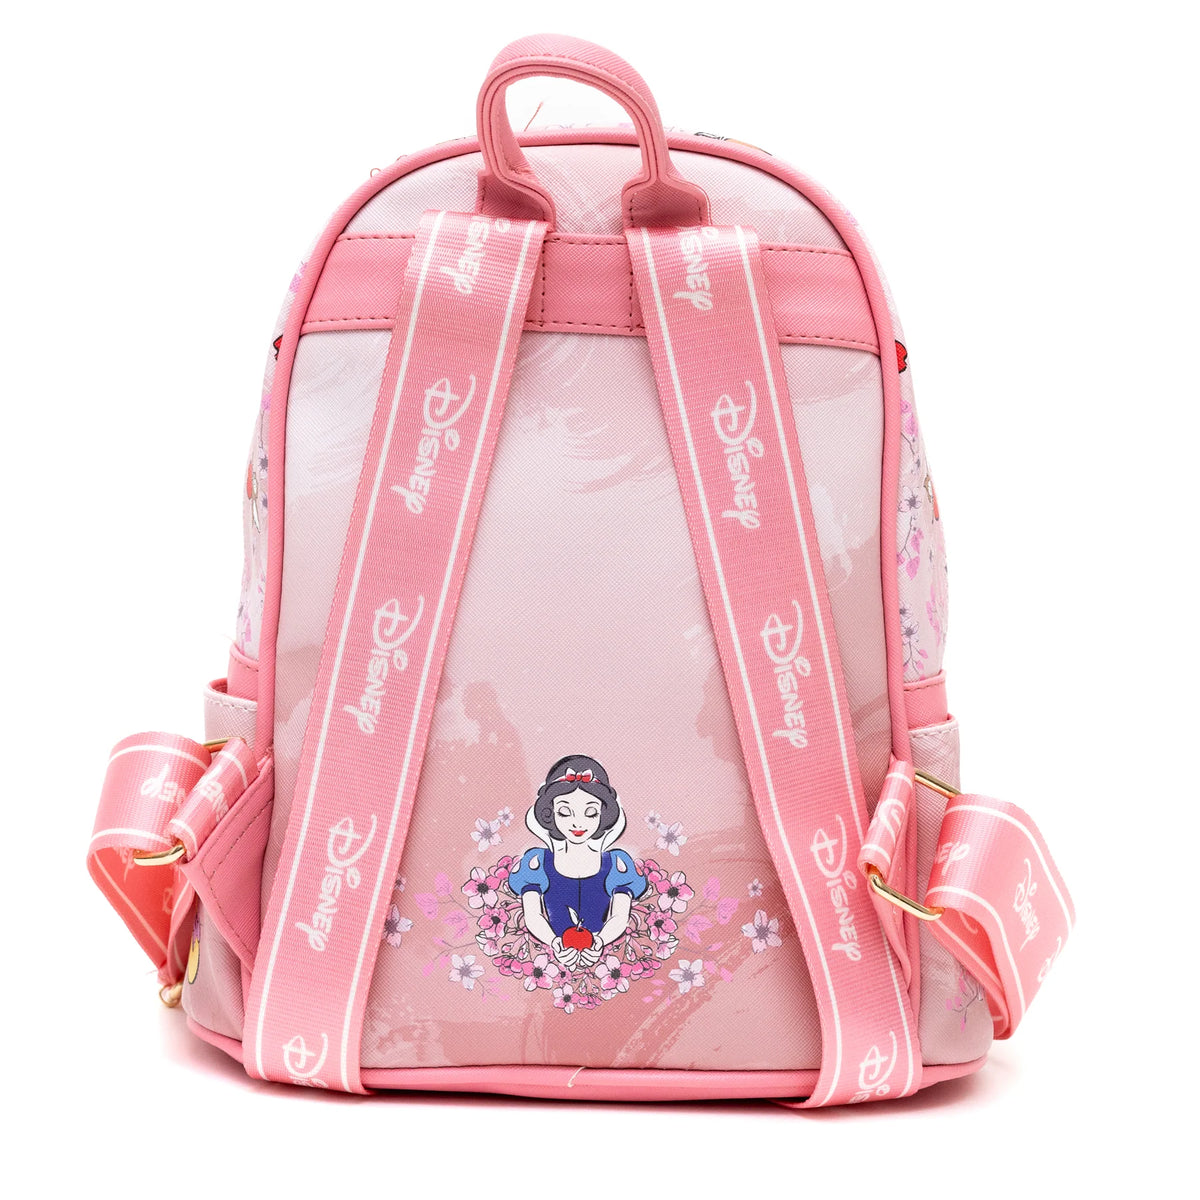 Loungefly Disney Princess Snow White Sketch Mini Backpack Bag Faux Leather  Vegan